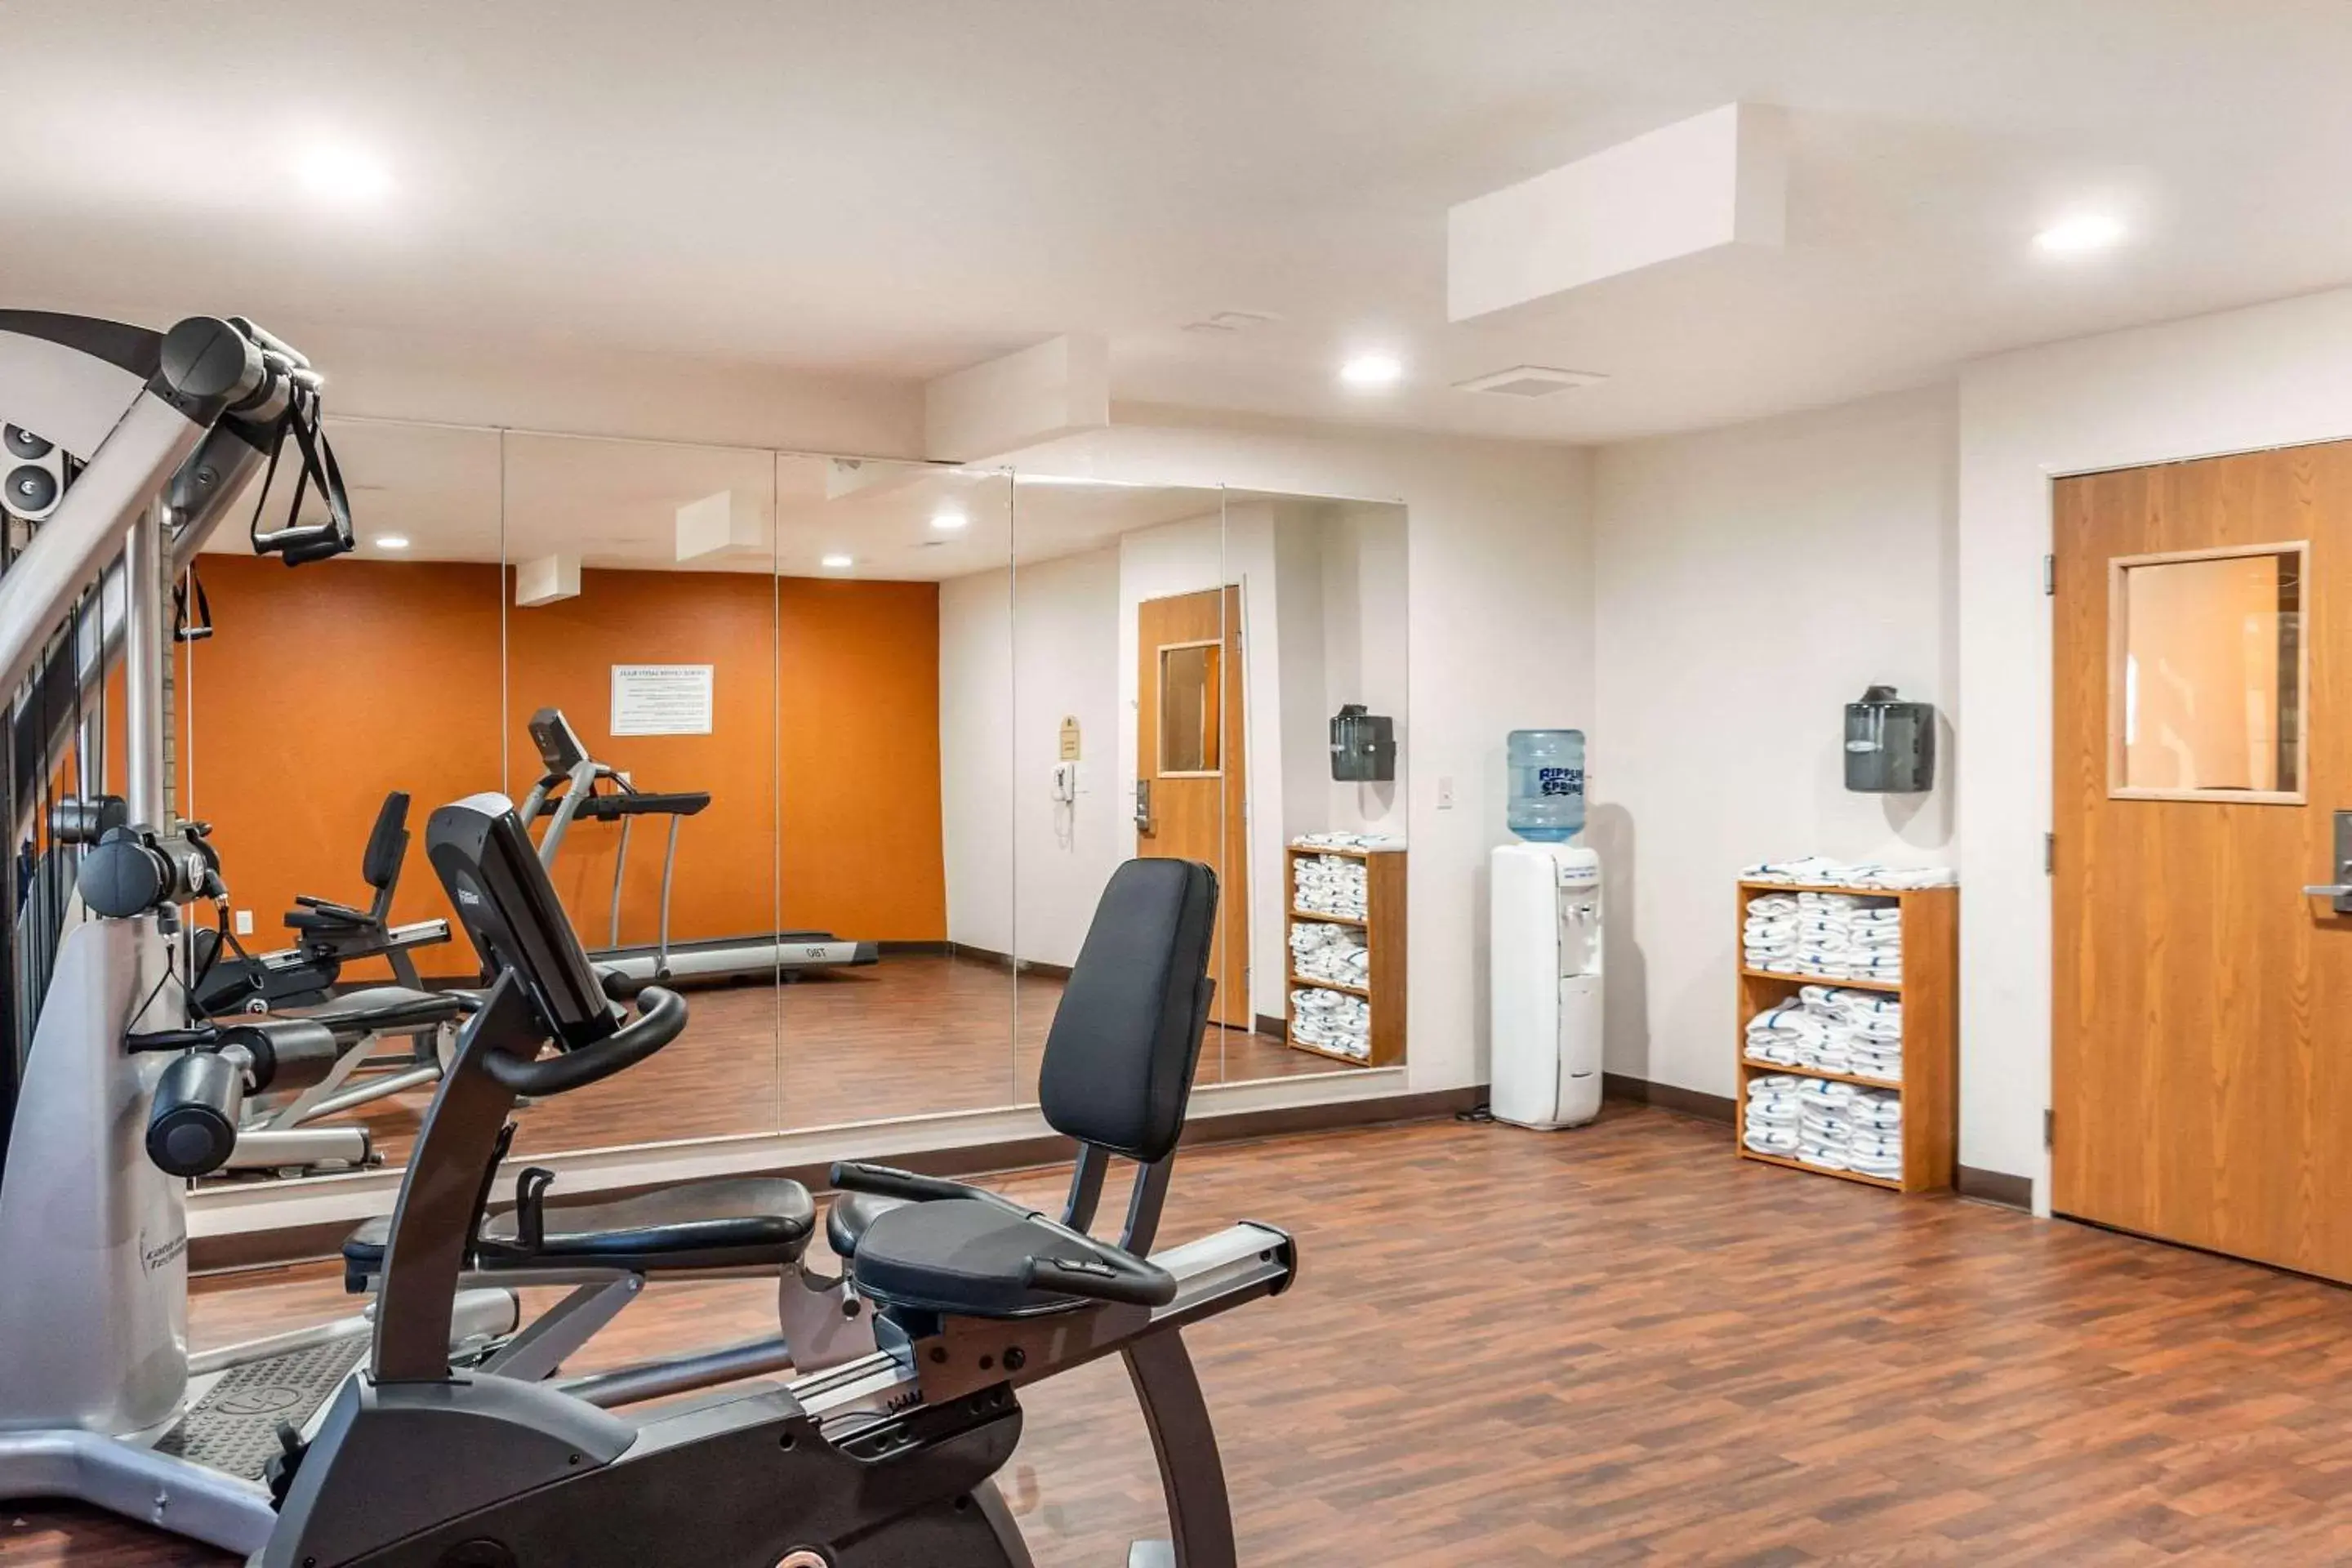 Fitness centre/facilities, Fitness Center/Facilities in MainStay Suites Dubuque at Hwy 20